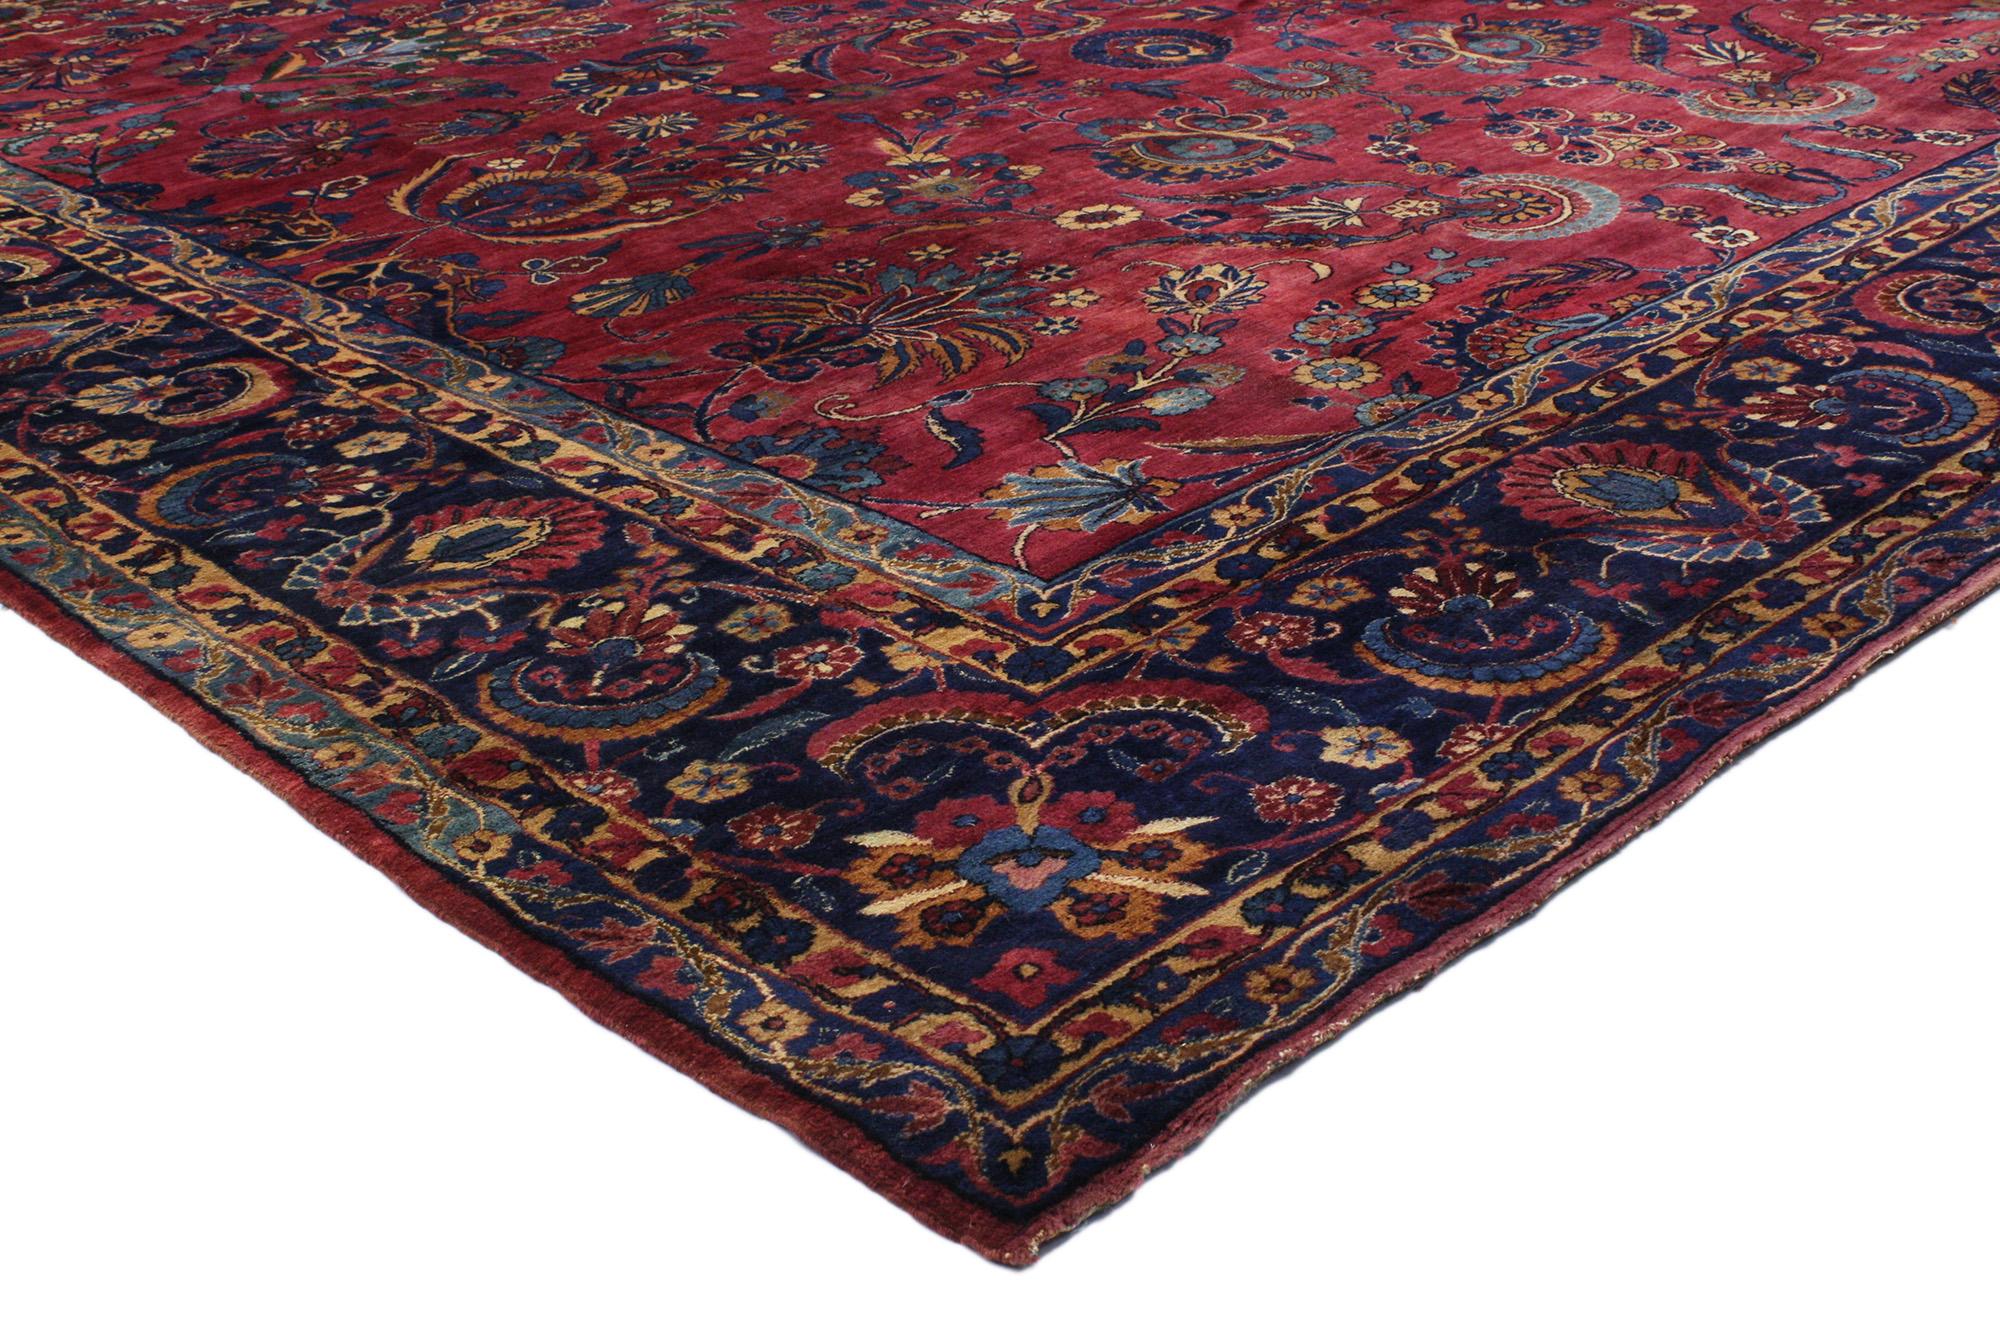 76761 Antique Persian Yazd Rug, 10'10 x 15'01. Yazd rugs, originating from the city of Yazd in central Iran, are renowned for their exceptional quality, intricate designs, and fine craftsmanship. Made from high-quality wool, silk, or a blend of